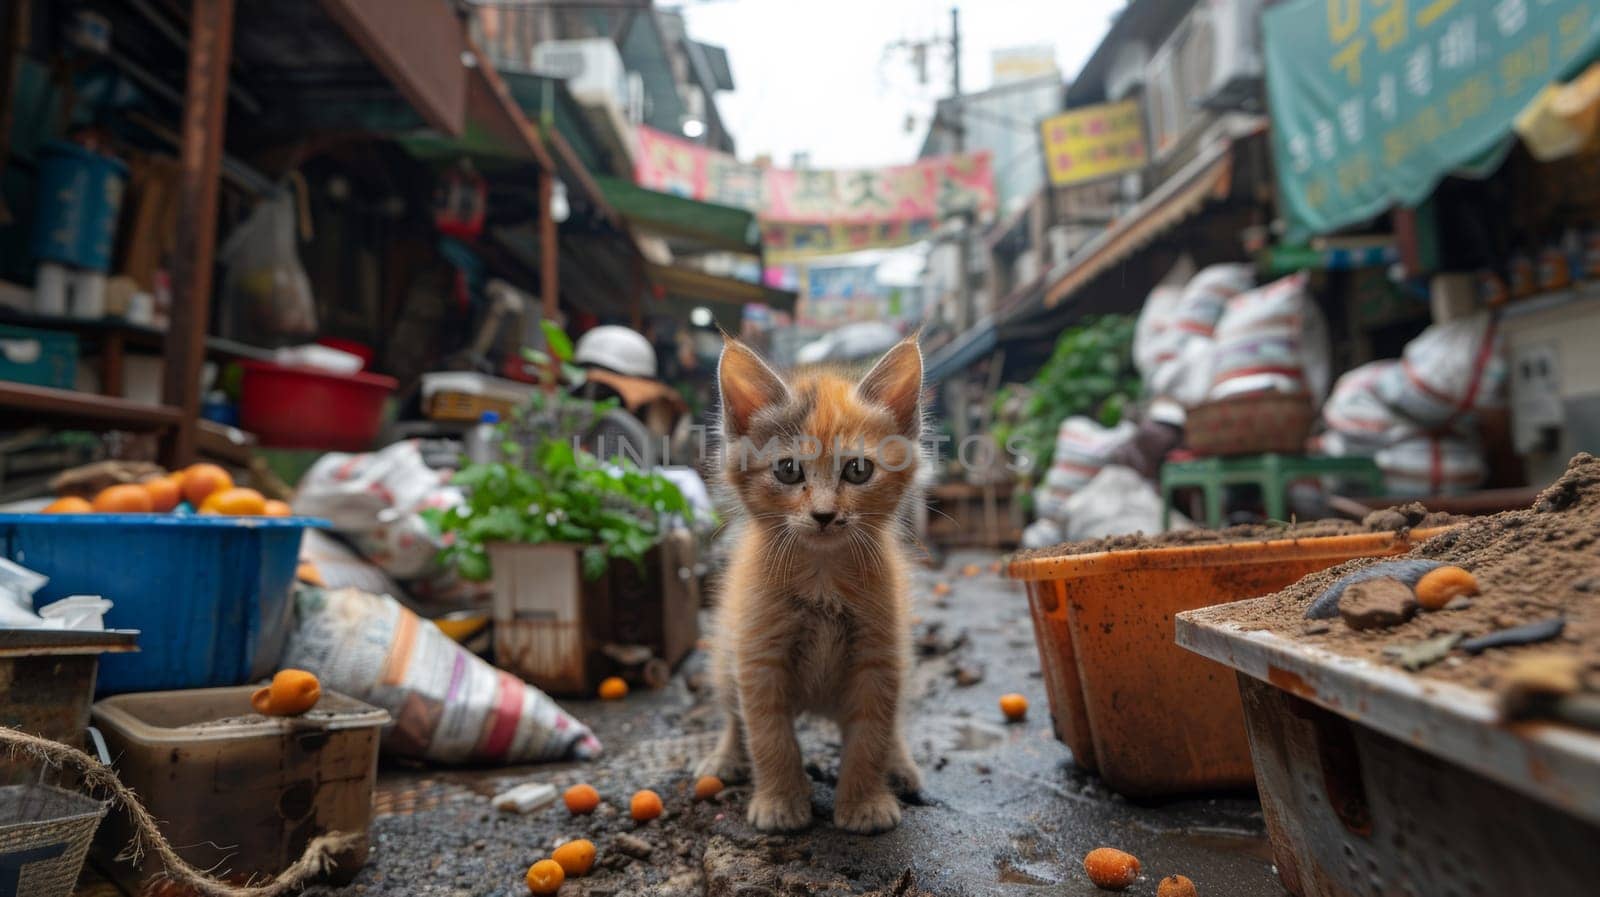 A small kitten standing in a dirty alley with fruit and vegetables